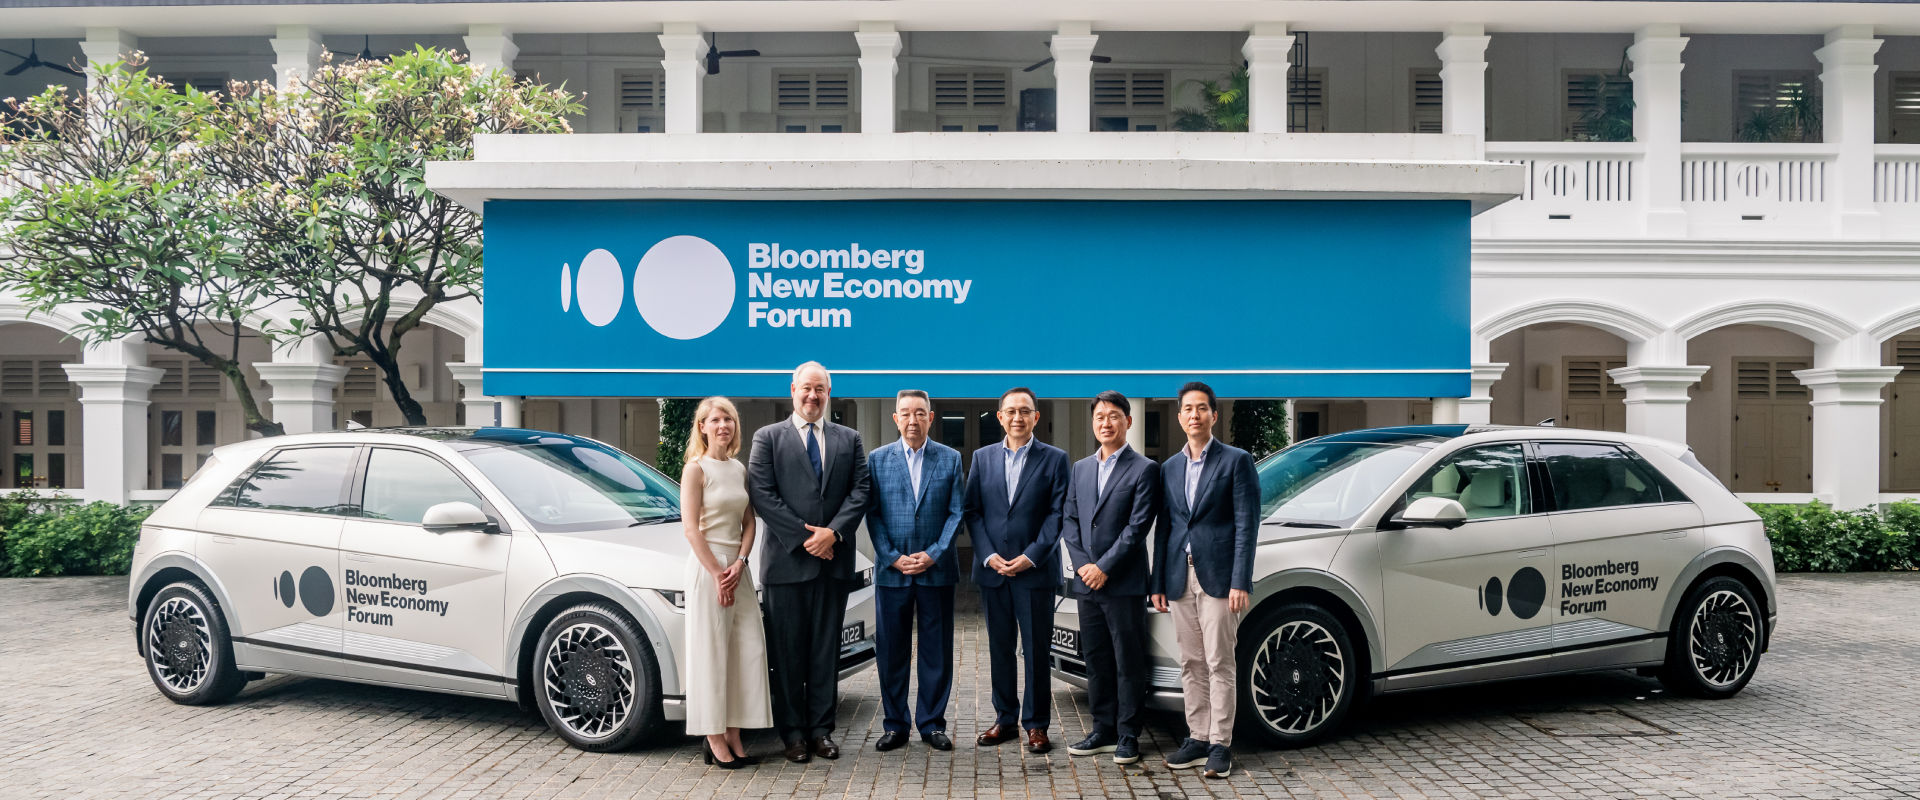 Komoco Motors Brings Clean Mobility with Hyundai IONIQ 5 and Smart City Vision to Singapore